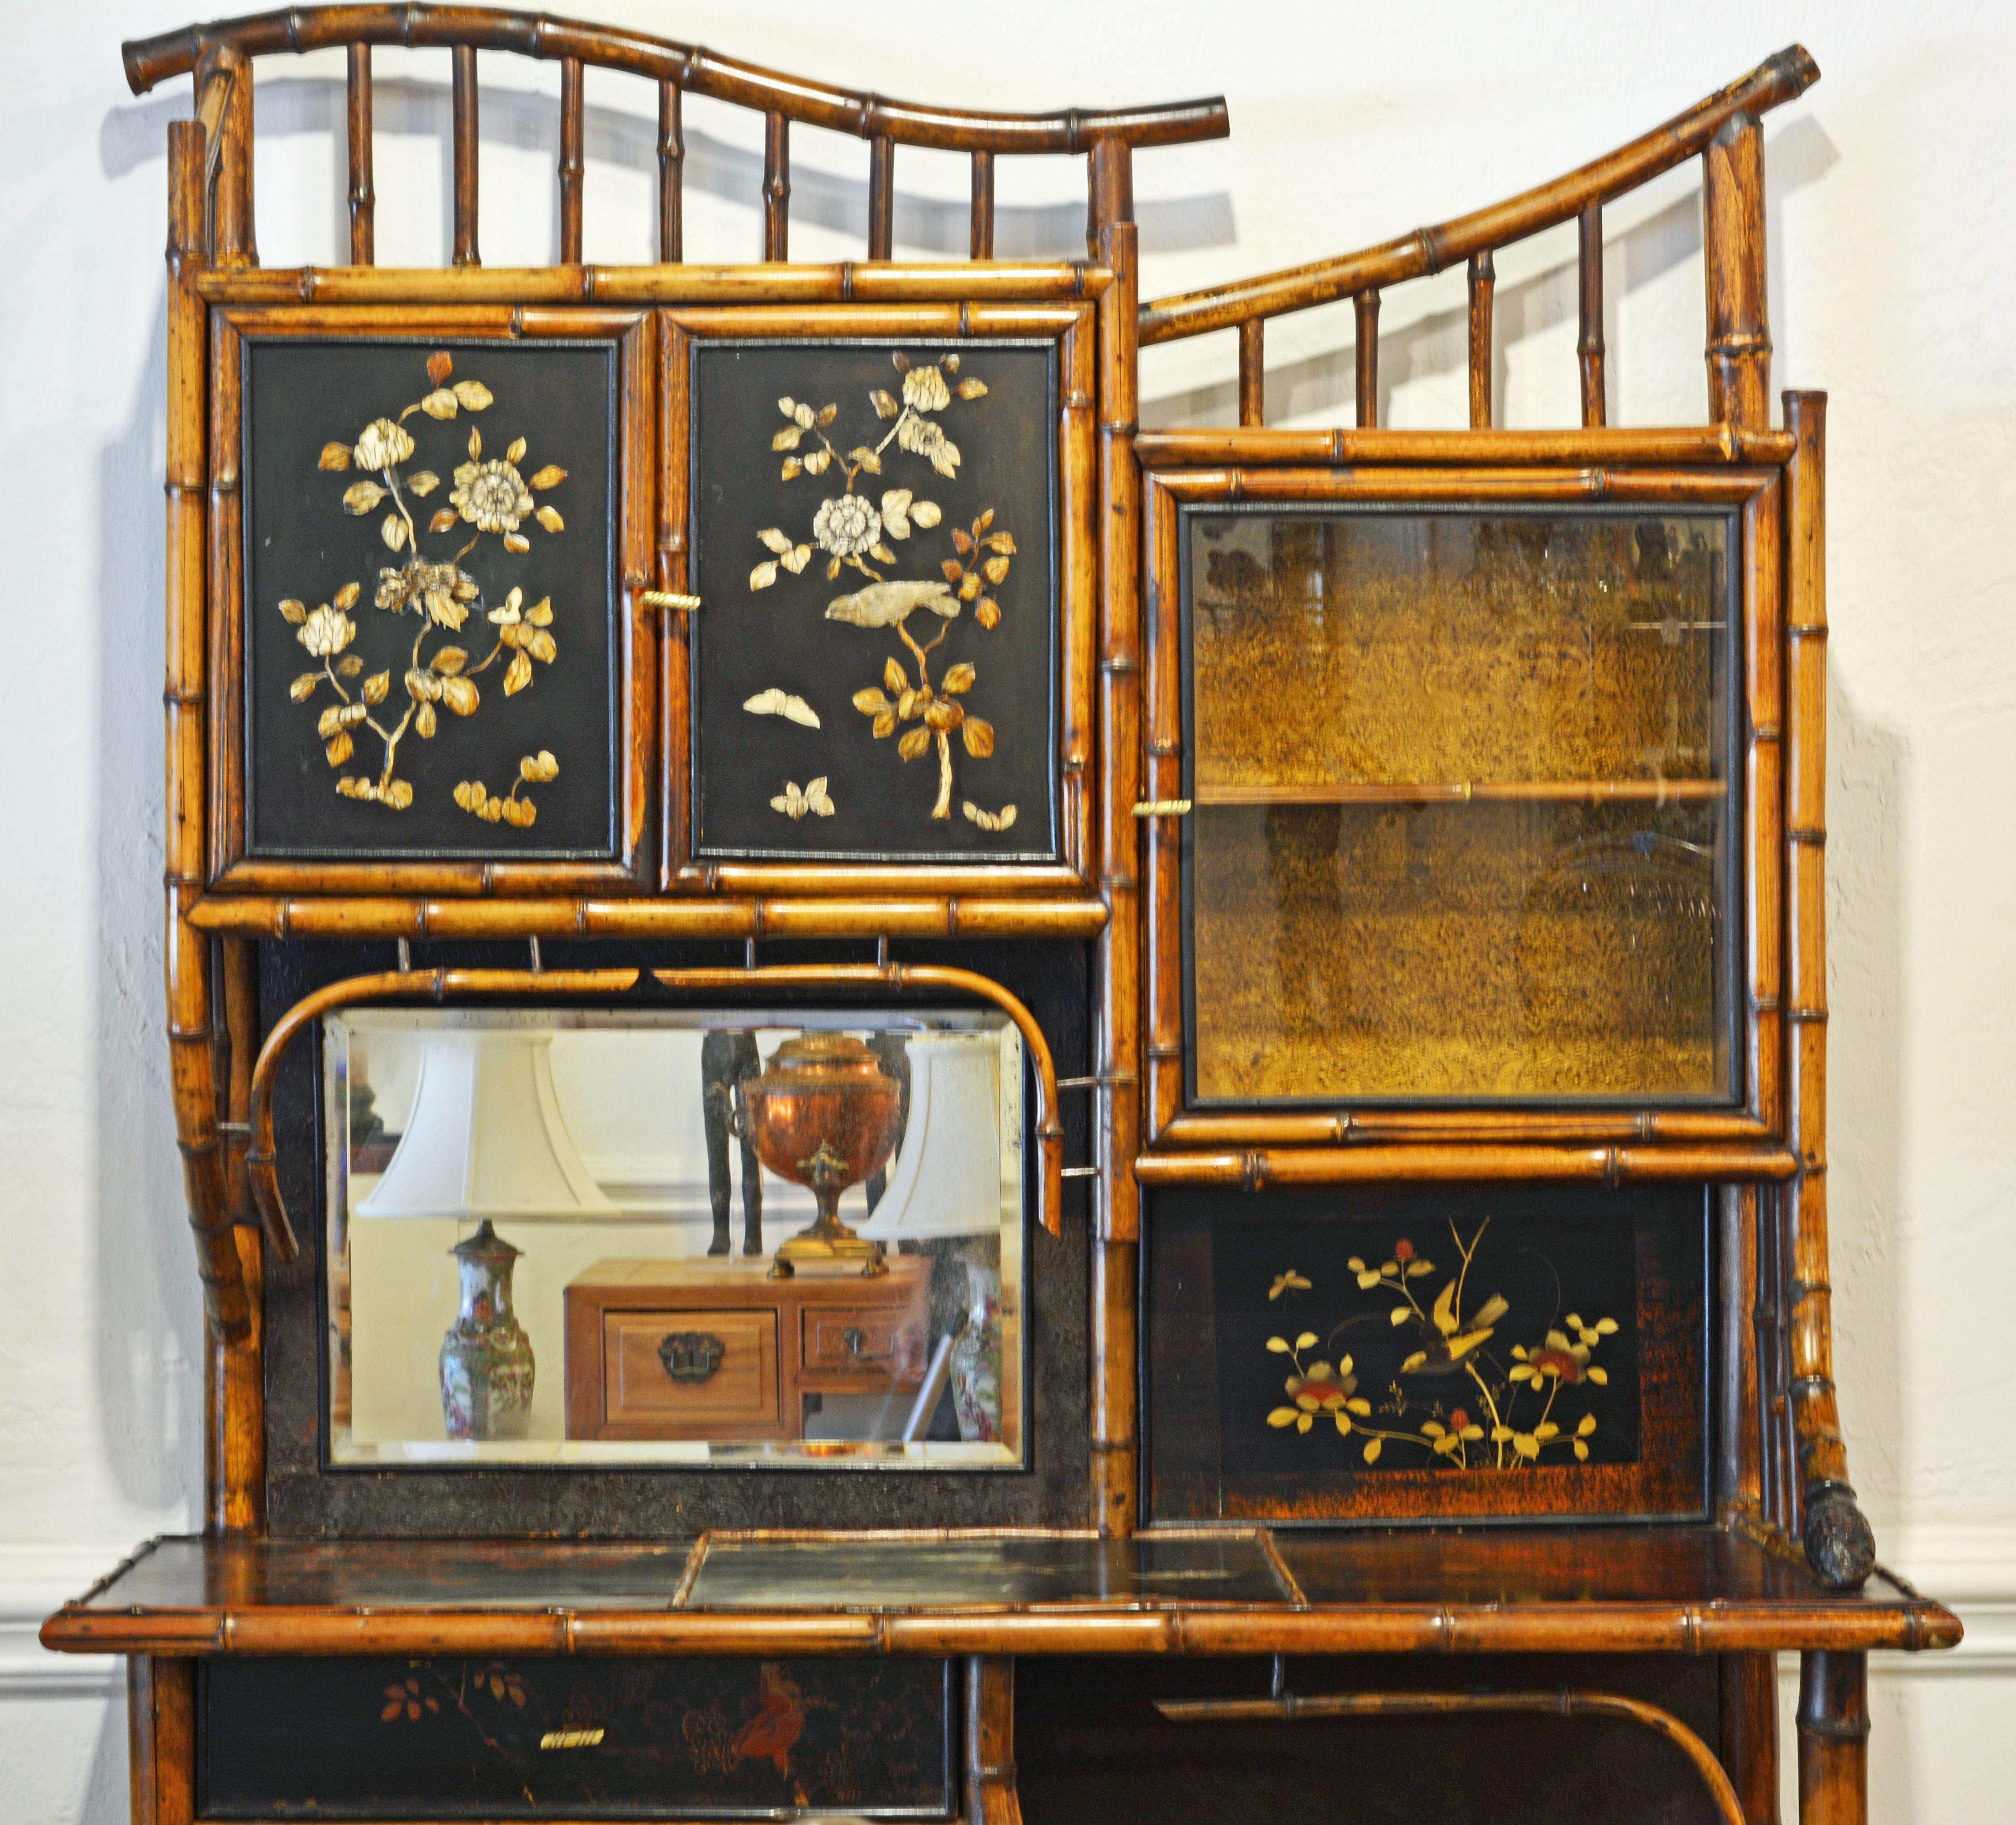 A wonderful English Burnished bamboo framework incorporating two cabinets with japanned lacquer doors and two cabinets with glass doors as well as a decorated table surface and open shelf compartments. Quite unique and elaborated in the manner of